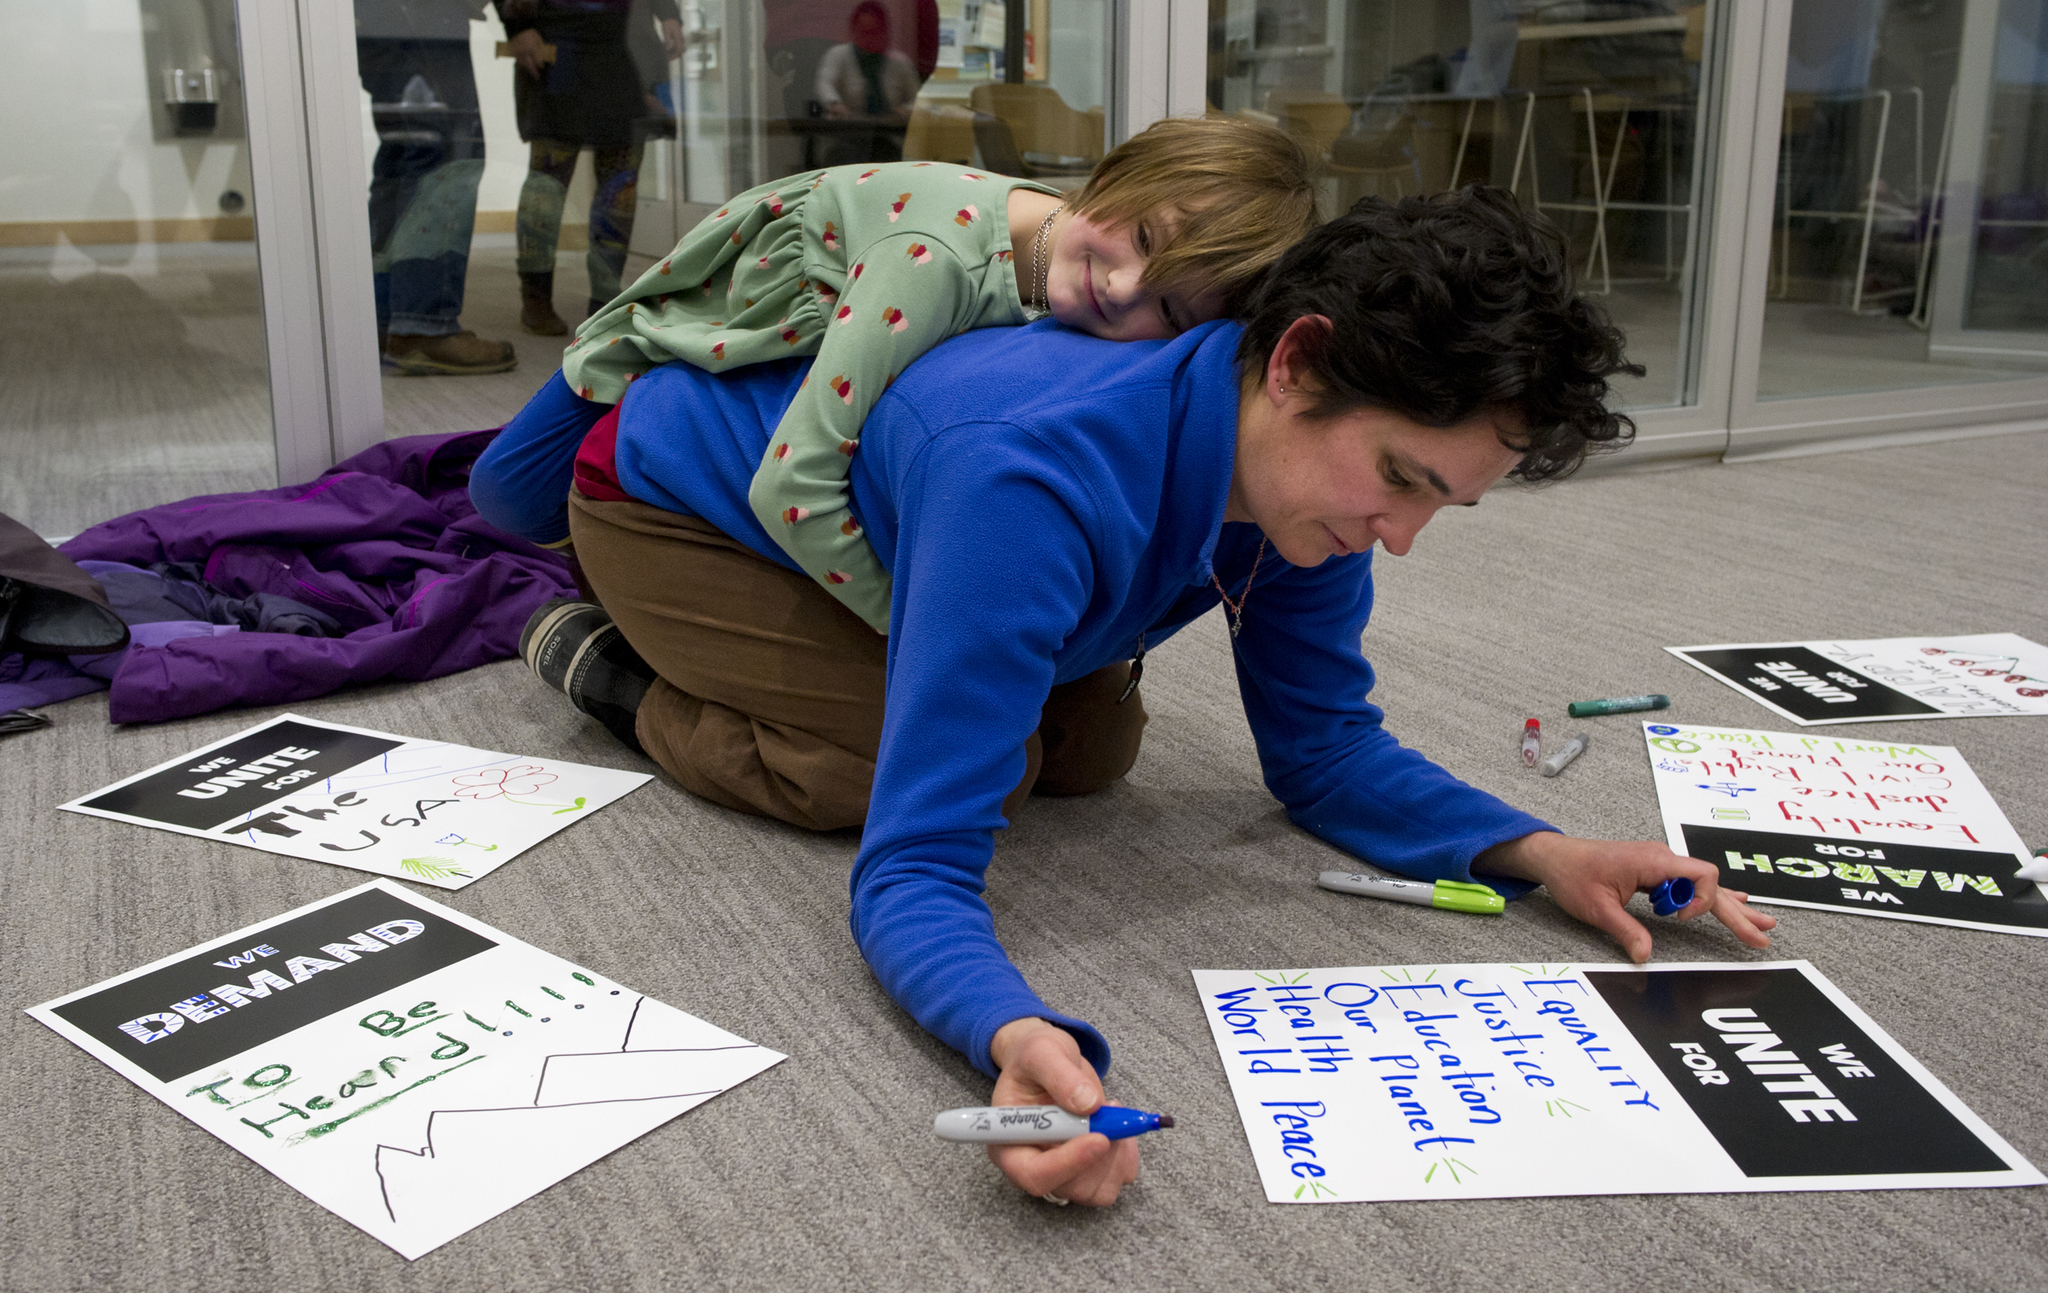 Eleanor Cullum, 6, stays close to her mom, Melissa, as they work on posters at the Mendenhall Public Library on Thursday for Saturday’s Women’s March on Juneau. The event starts at the Alaska State Capitol steps at 9 a.m. and finishes at the Juneau Arts & Culture Center. (Michael Penn | Juneau Empire)